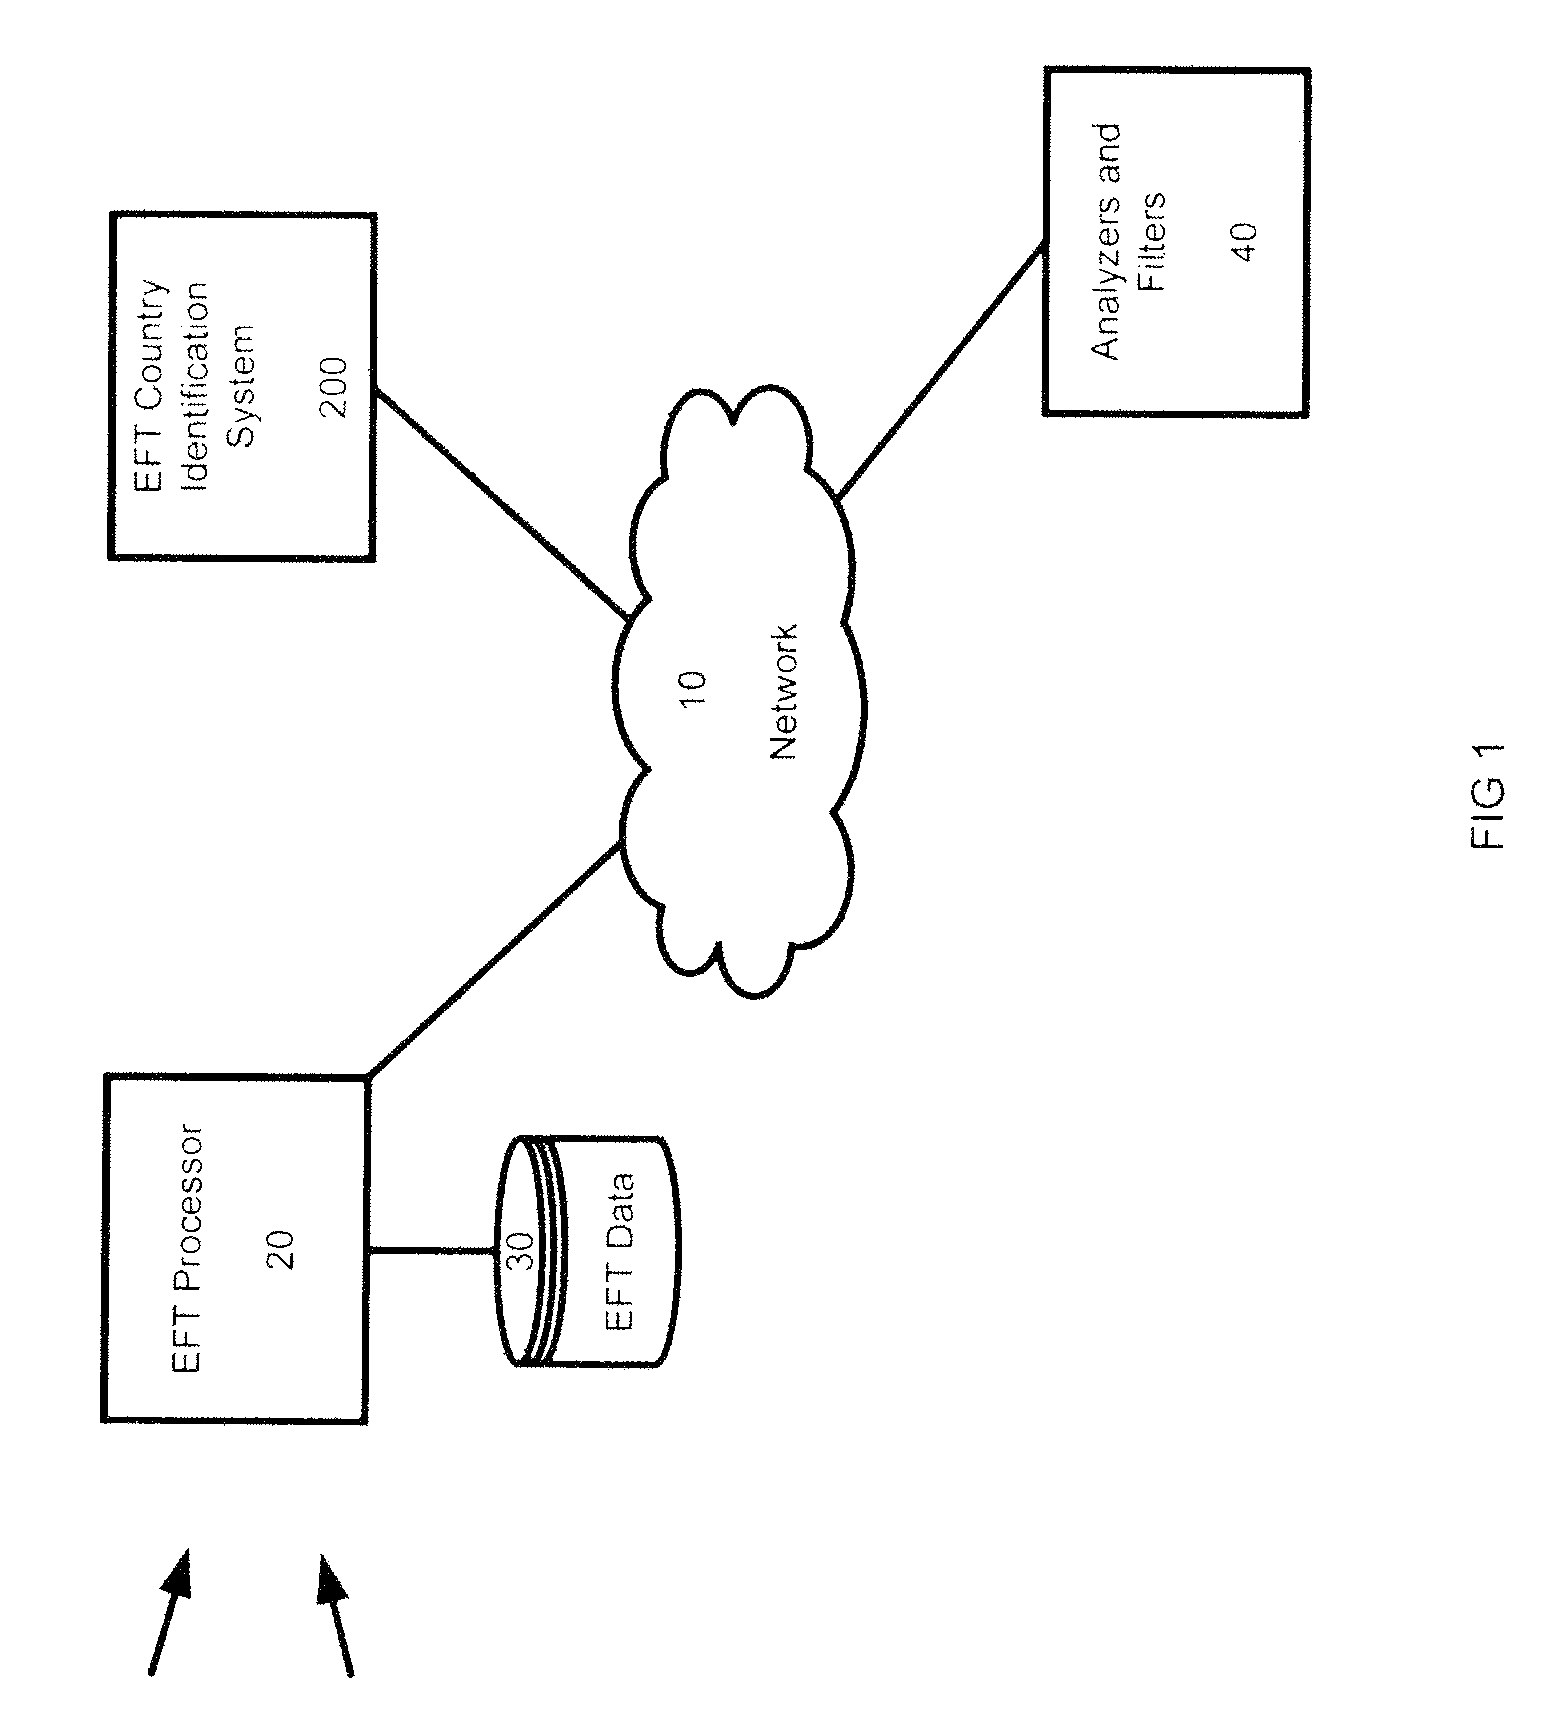 System and method for risk evaluation in EFT transactions